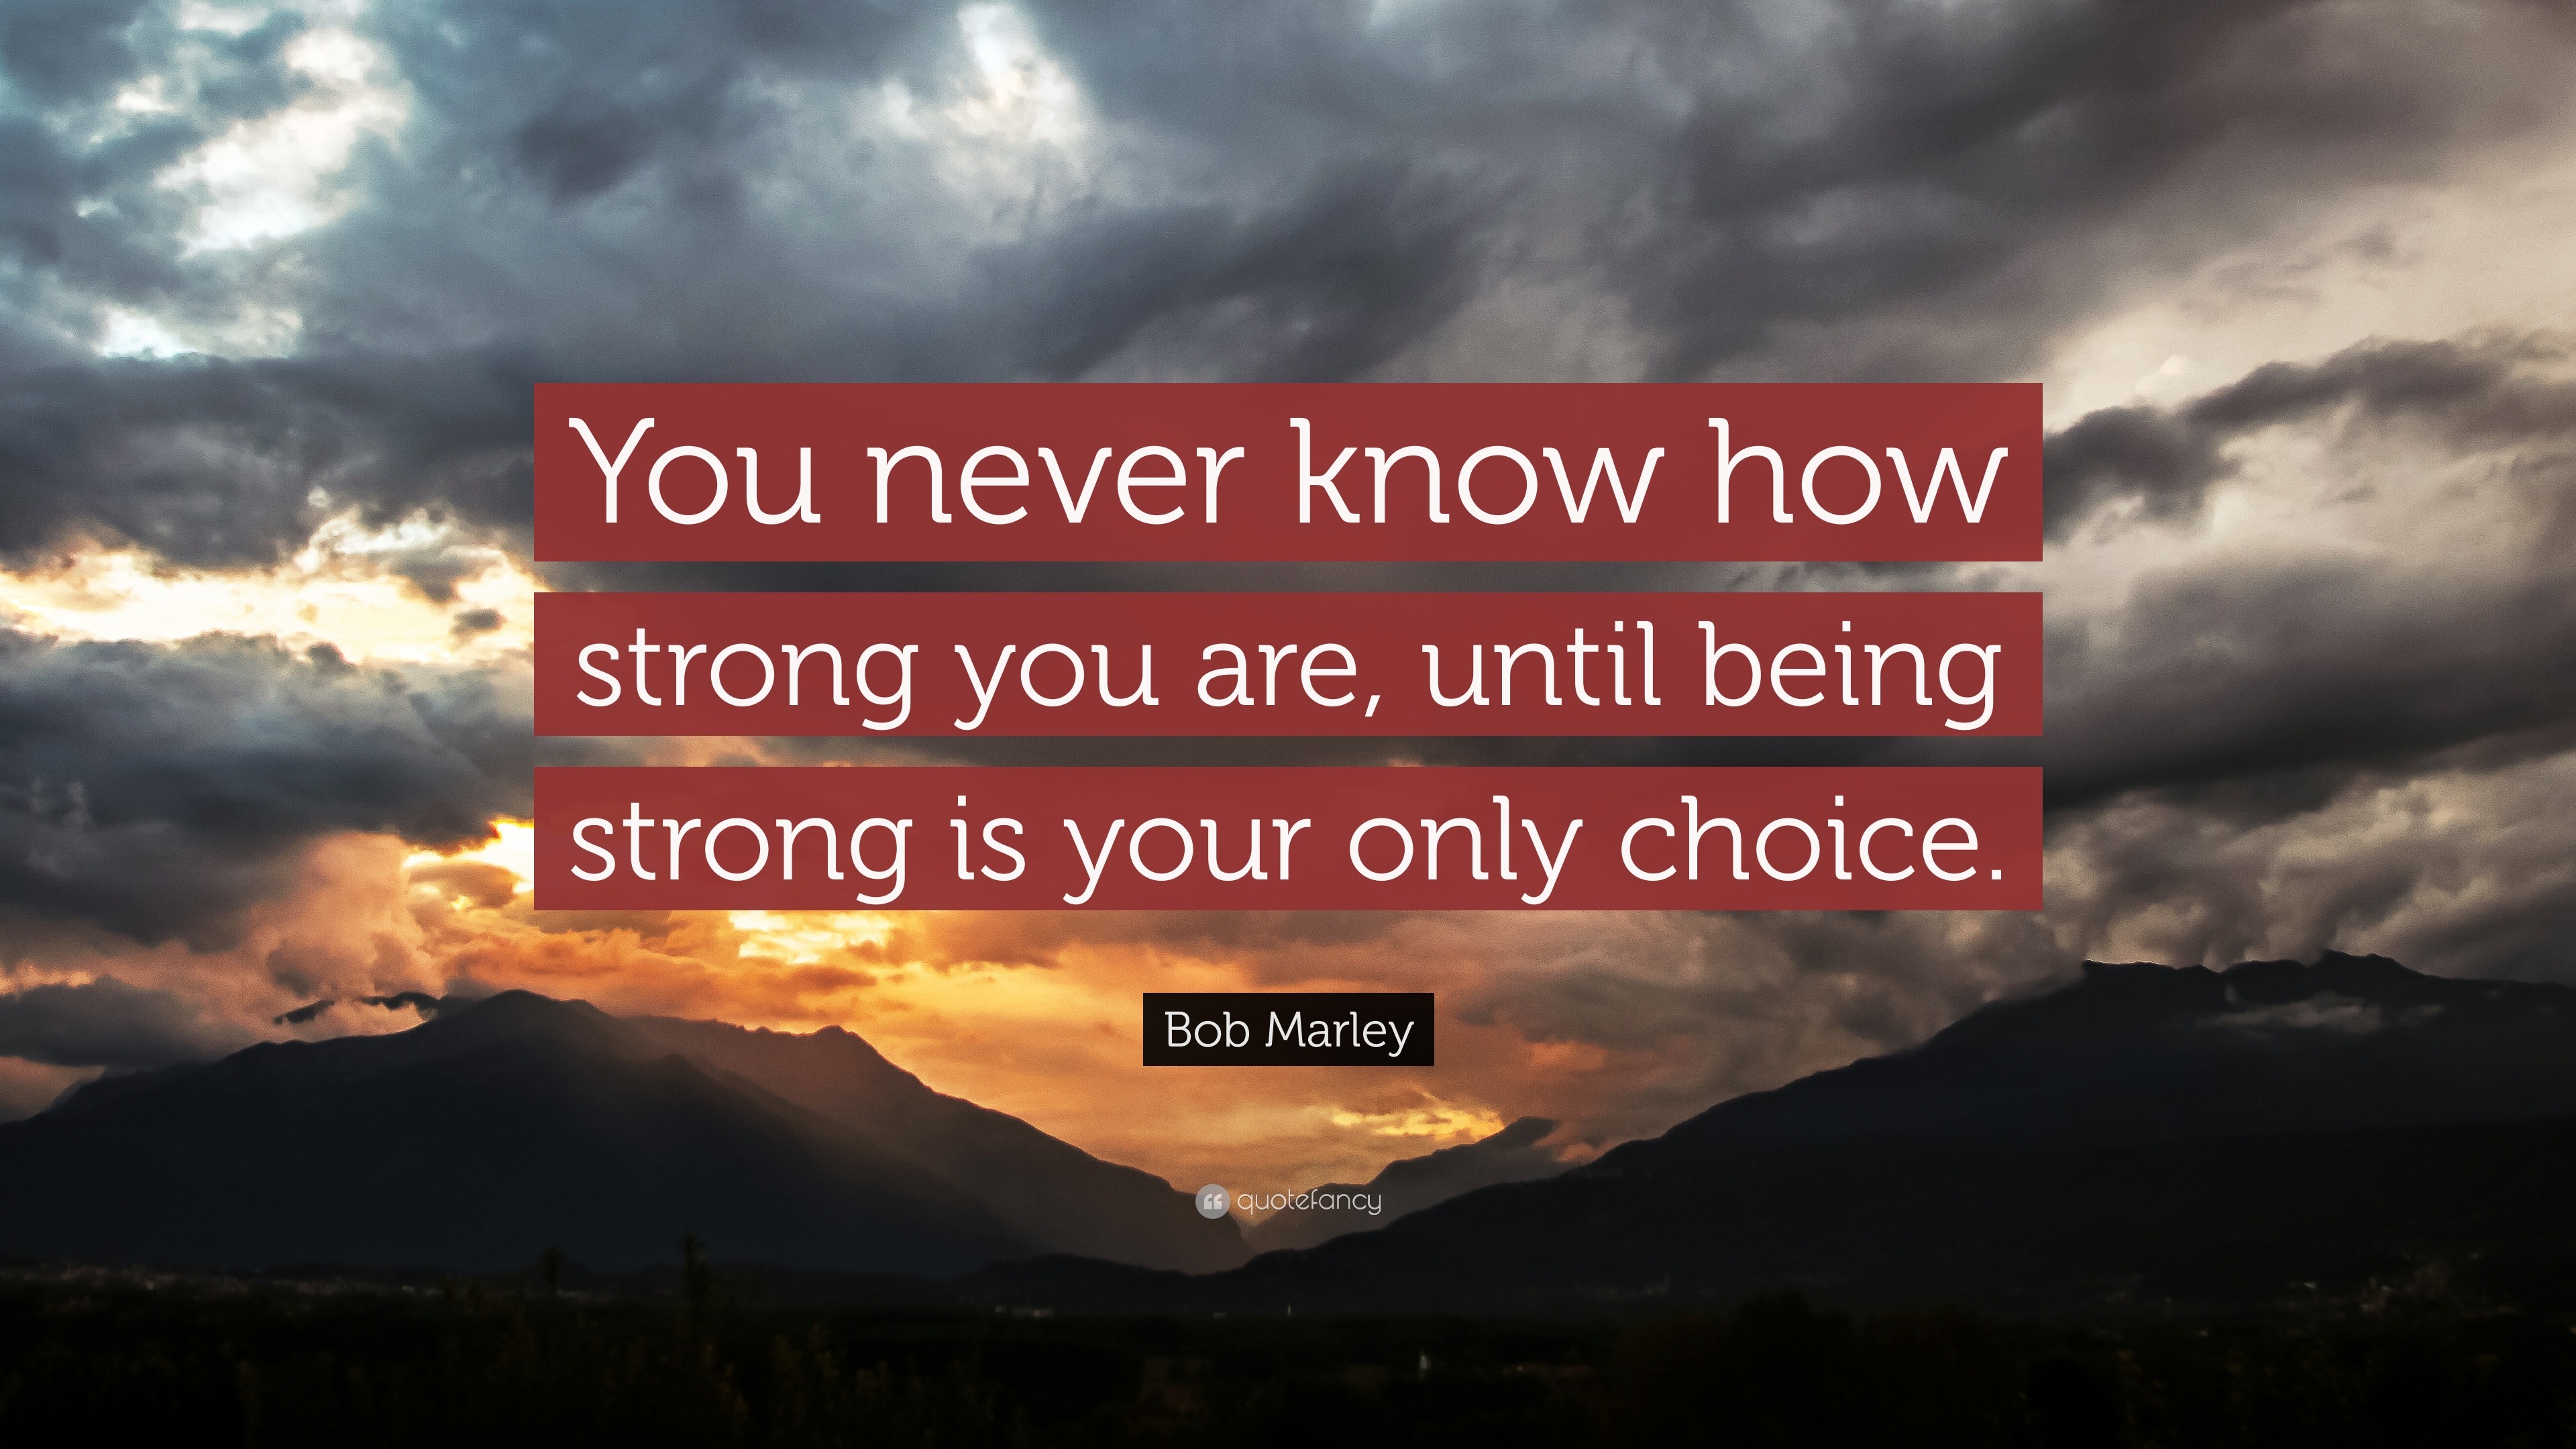 Be strong слова. You never know how strong you are until being strong is your only choice. You will never know how strong you are until being strong is your only choice. How strong are you. The man who moves Mountains.